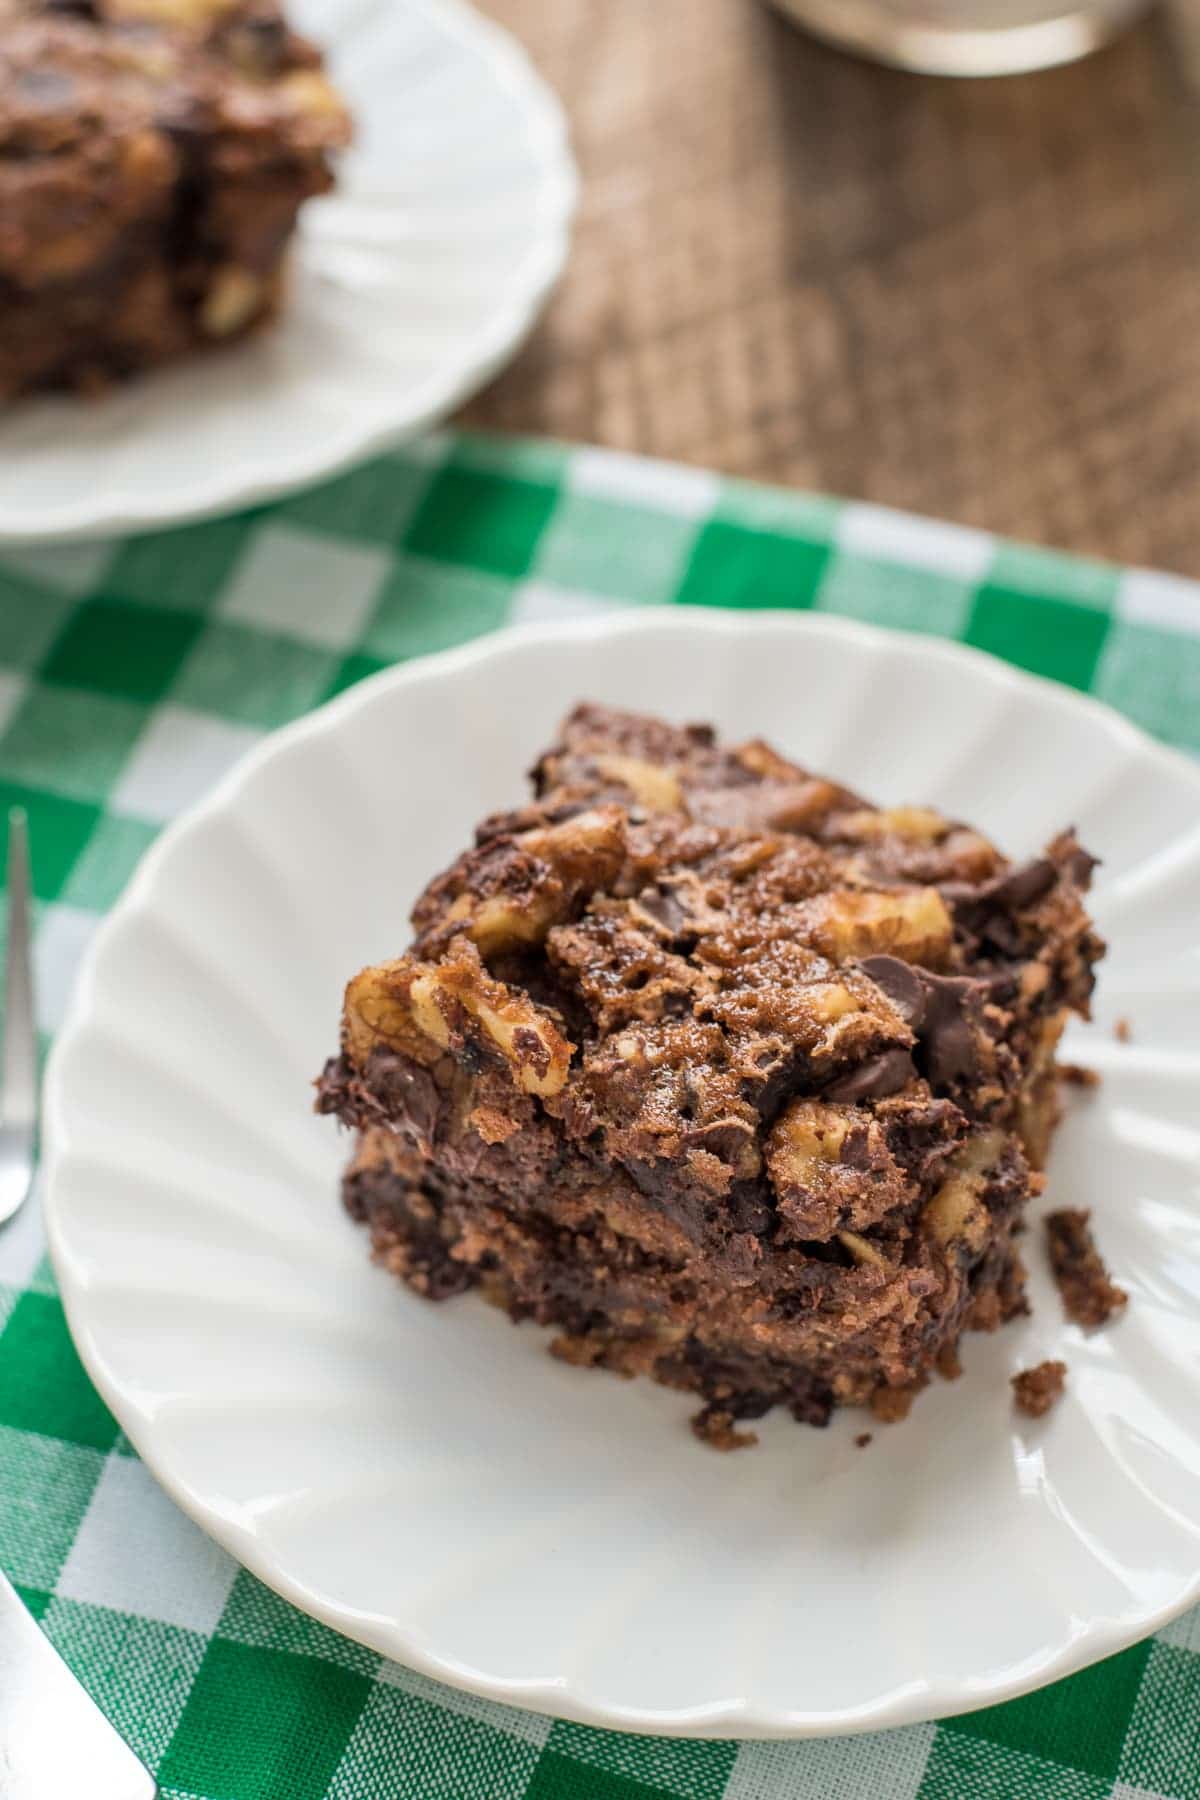 This Oatmeal Chocolate Chip Snack Cake is the perfect after school treat with a tall glass of milk!